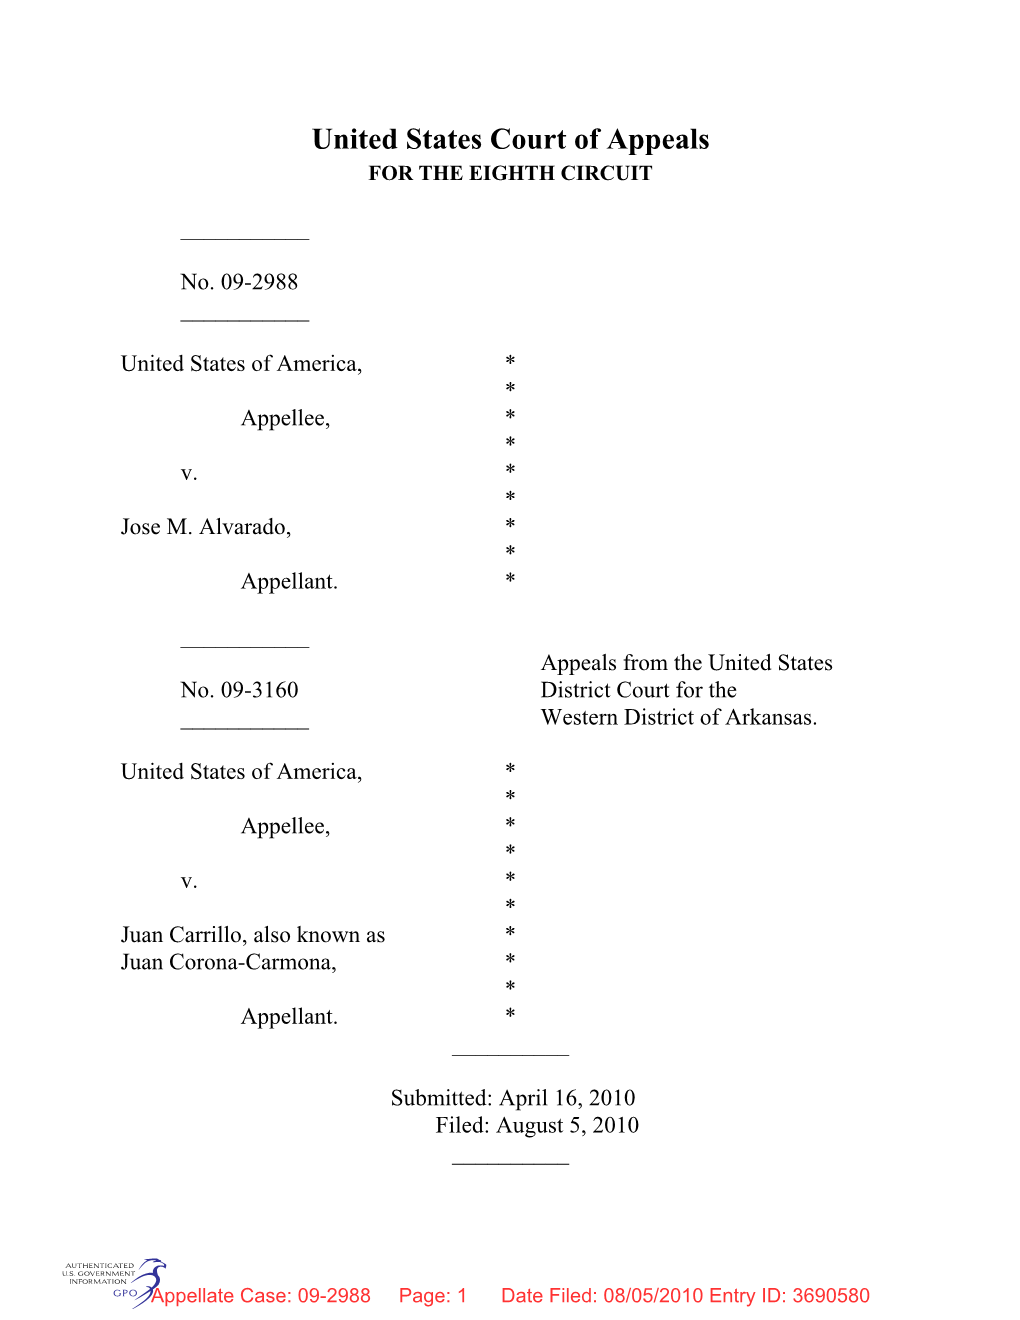 United States Court of Appeals for the EIGHTH CIRCUIT